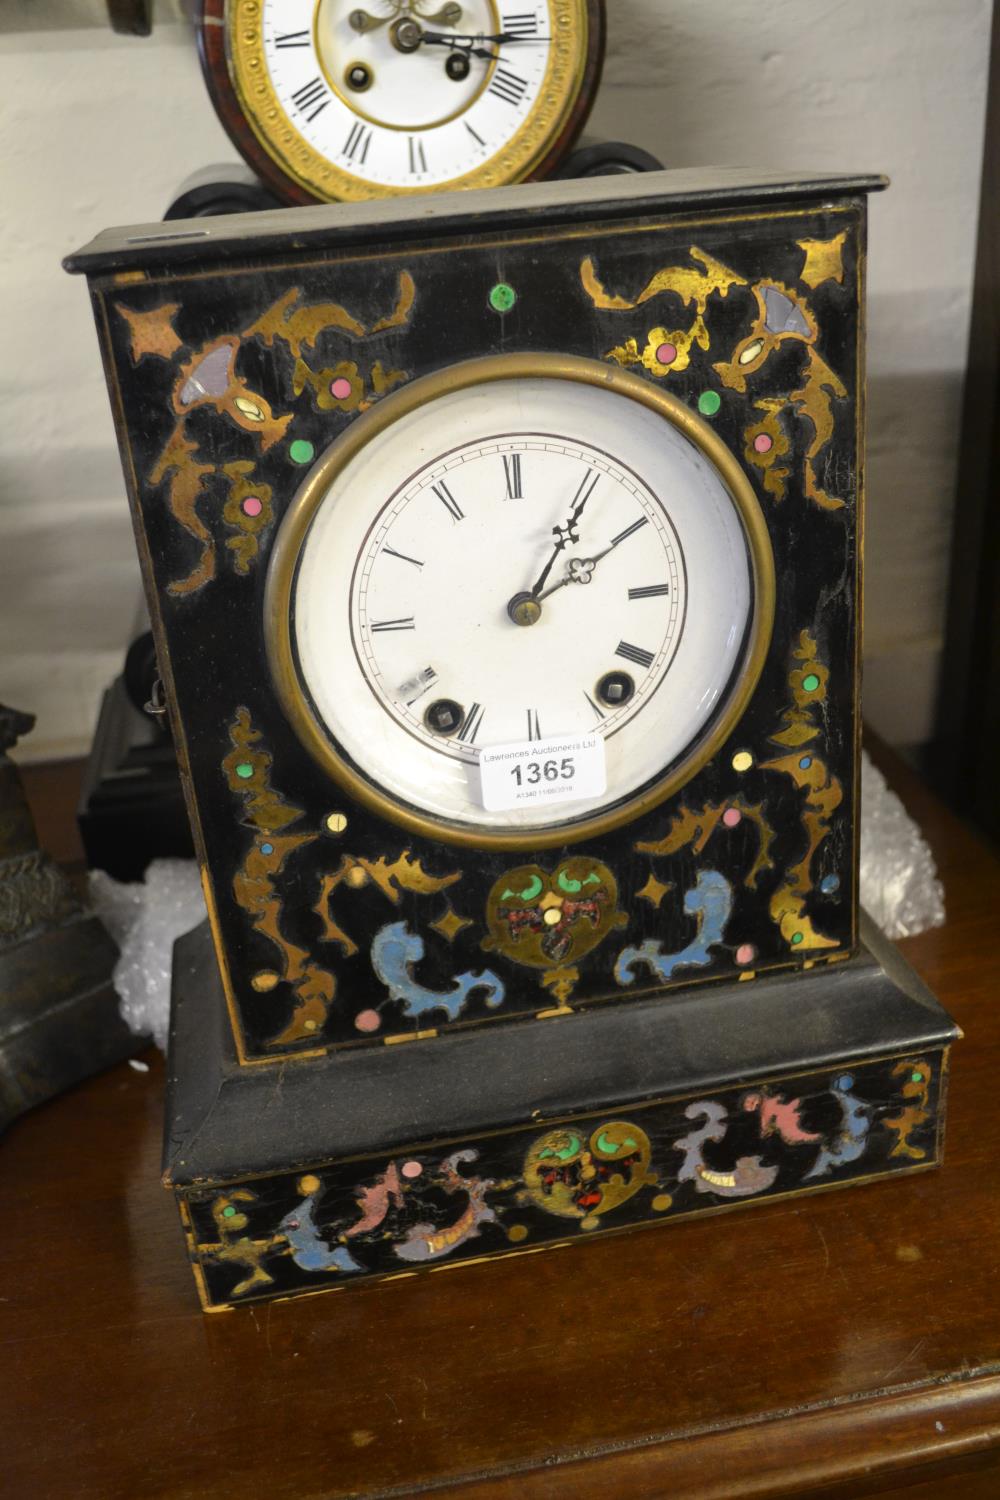 19th Century Continental buhl inlaid mantel clock, the ebonised case enclosing an enamel dial with